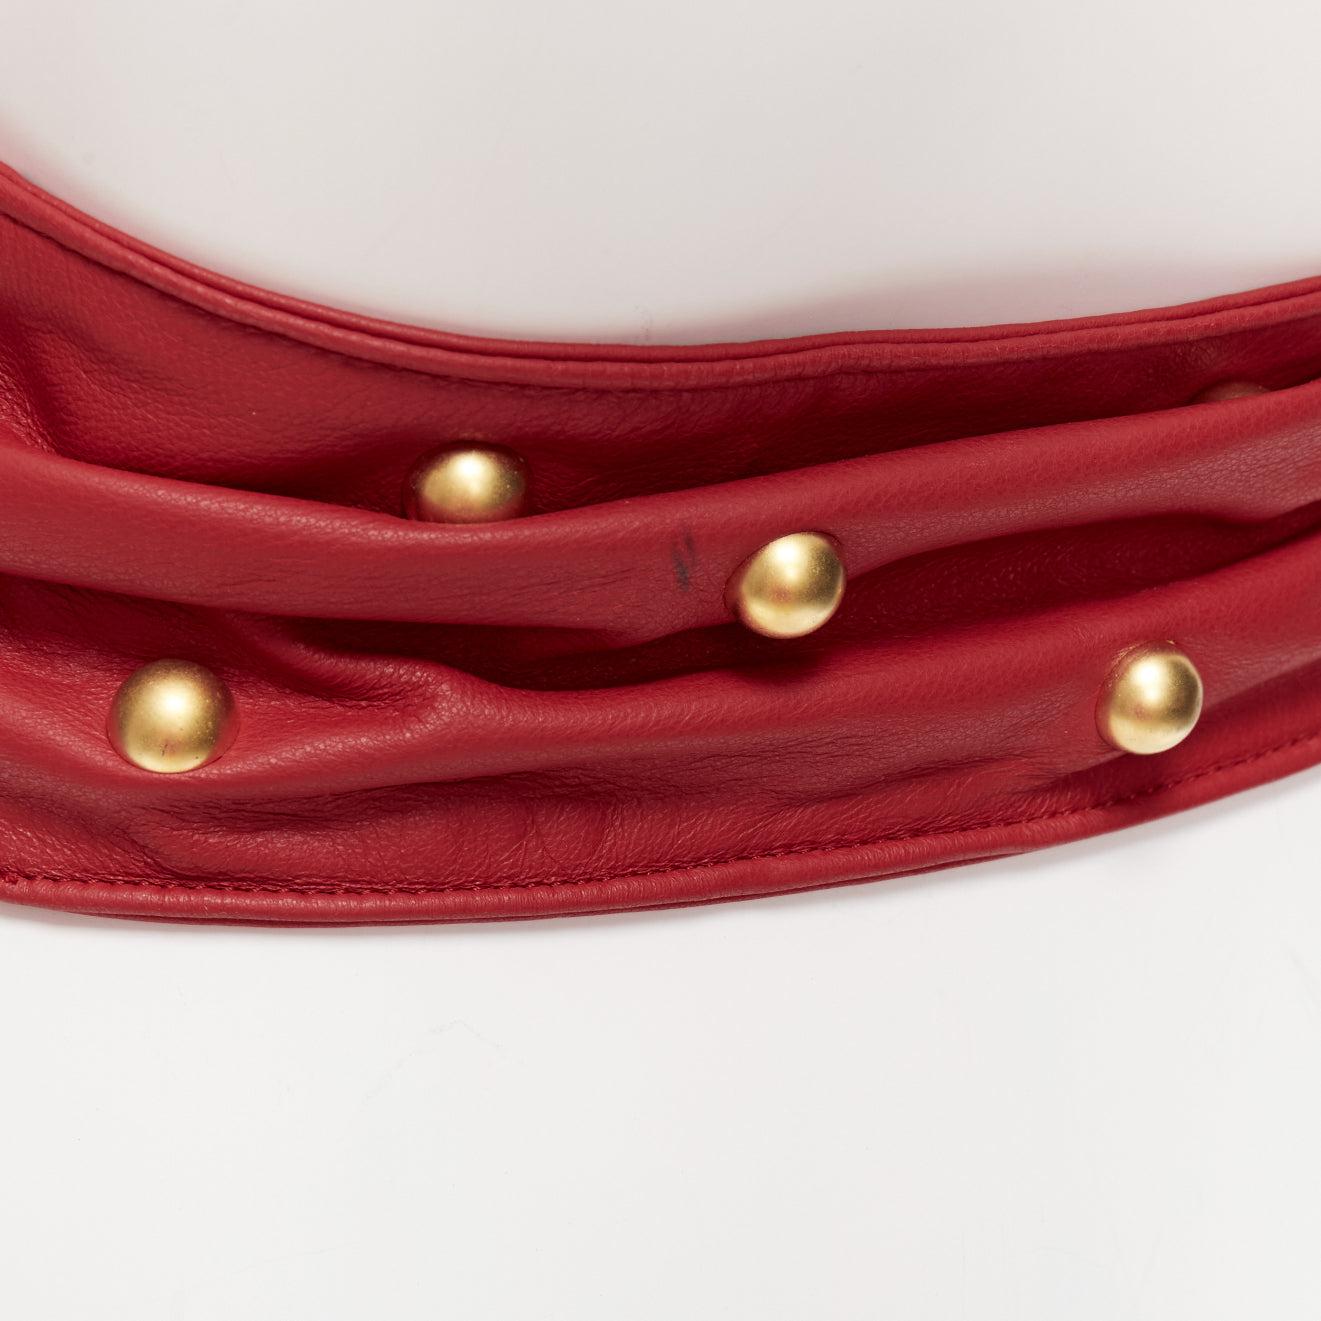 PHILOSOPHY DI LORENZO SERAFINI red soft leather gold dome studs wide belt S
Reference: AAWC/A01207
Brand: Philosophy
Material: Leather
Color: Red, Gold
Pattern: Studded
Closure: Self Tie
Lining: Red Leather
Extra Details: Free size tie.
Made in: